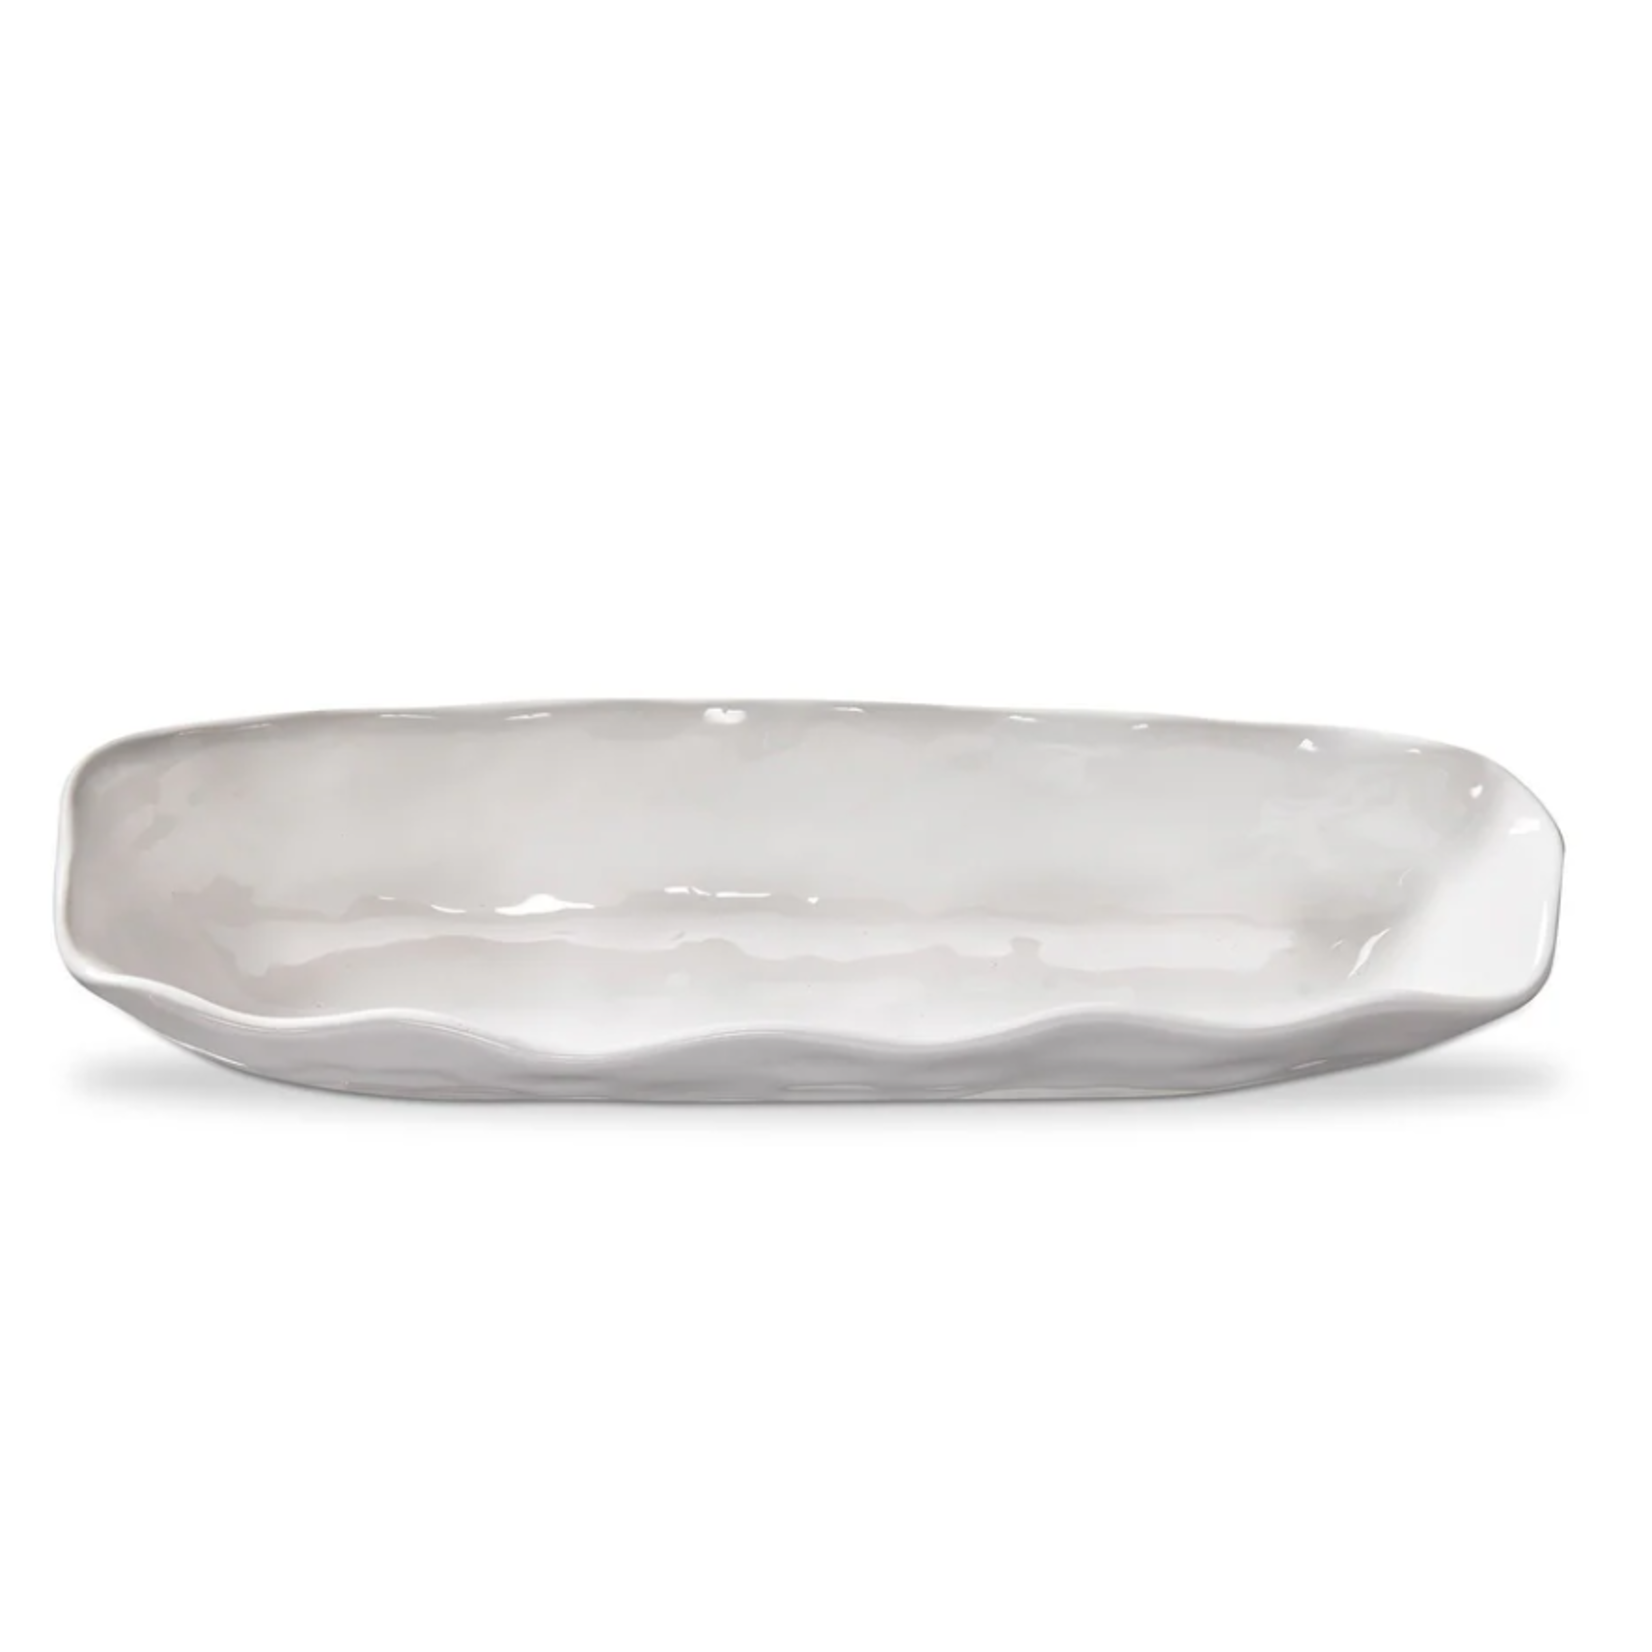 Tag Oval Cracker Dish - White